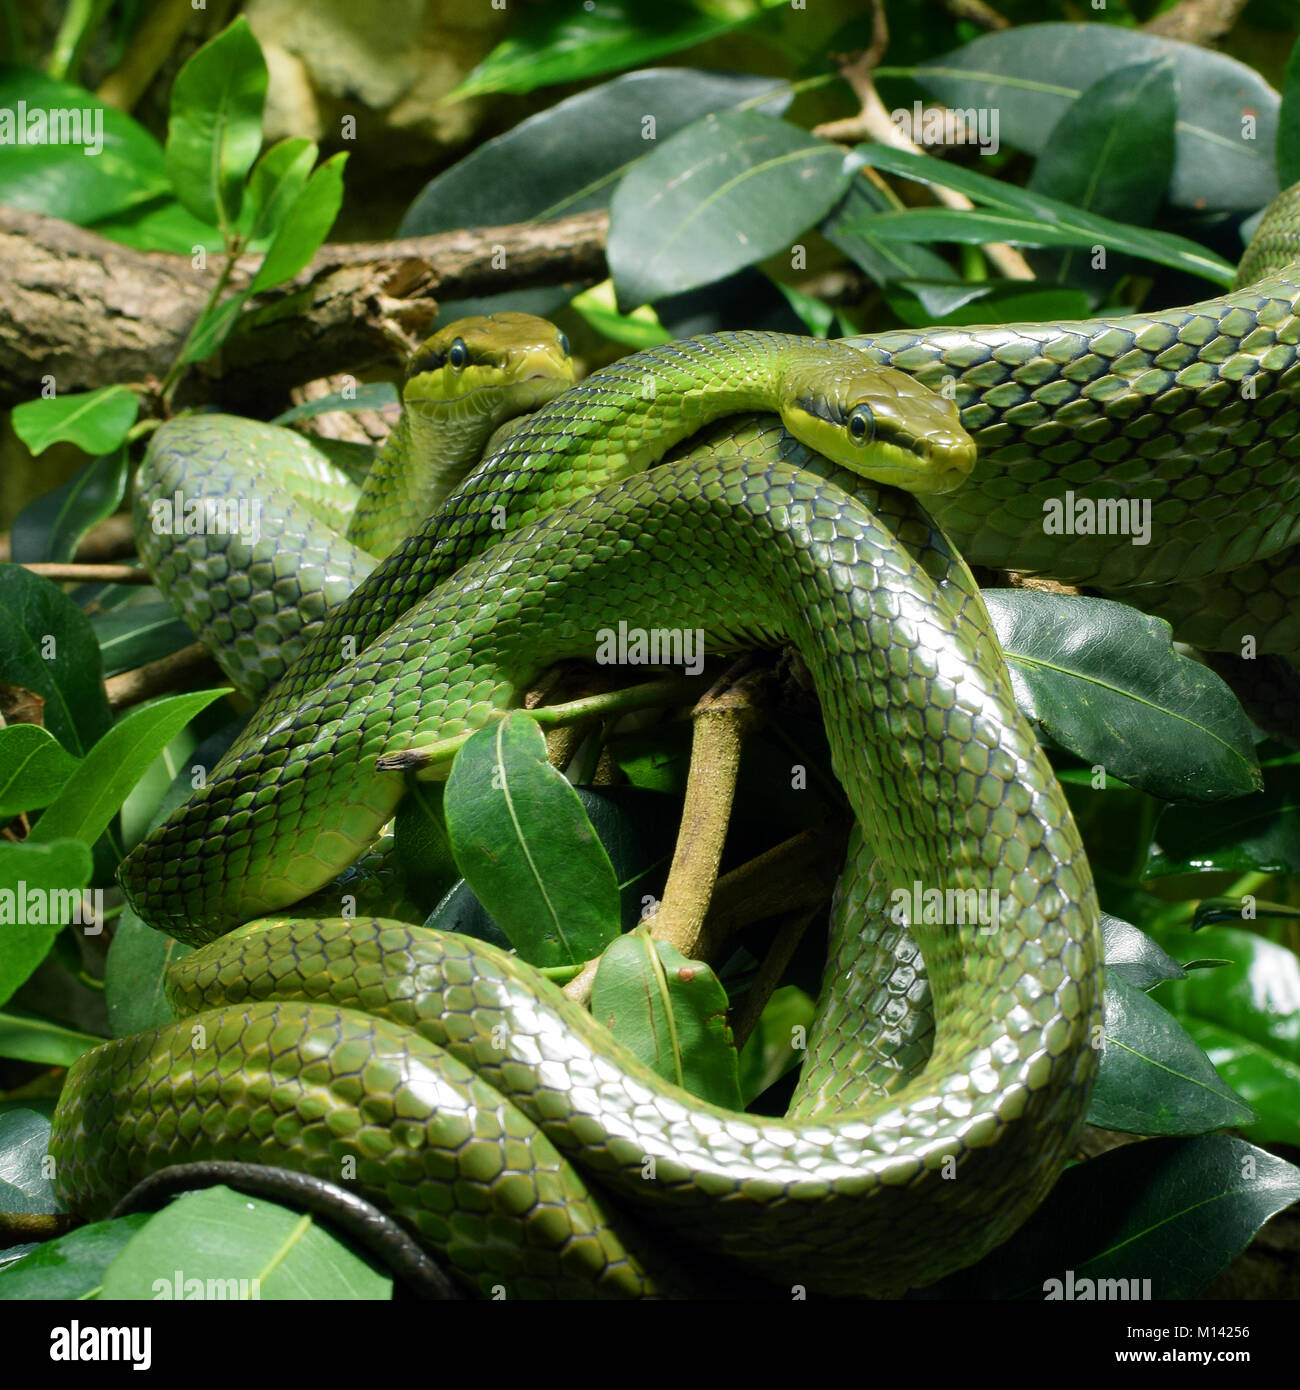 Two green snakes: red-tailed green ratsnake (Gonyosoma oxycephalum, also known as arboreal ratsnake and red-tailed racer). Stock Photo